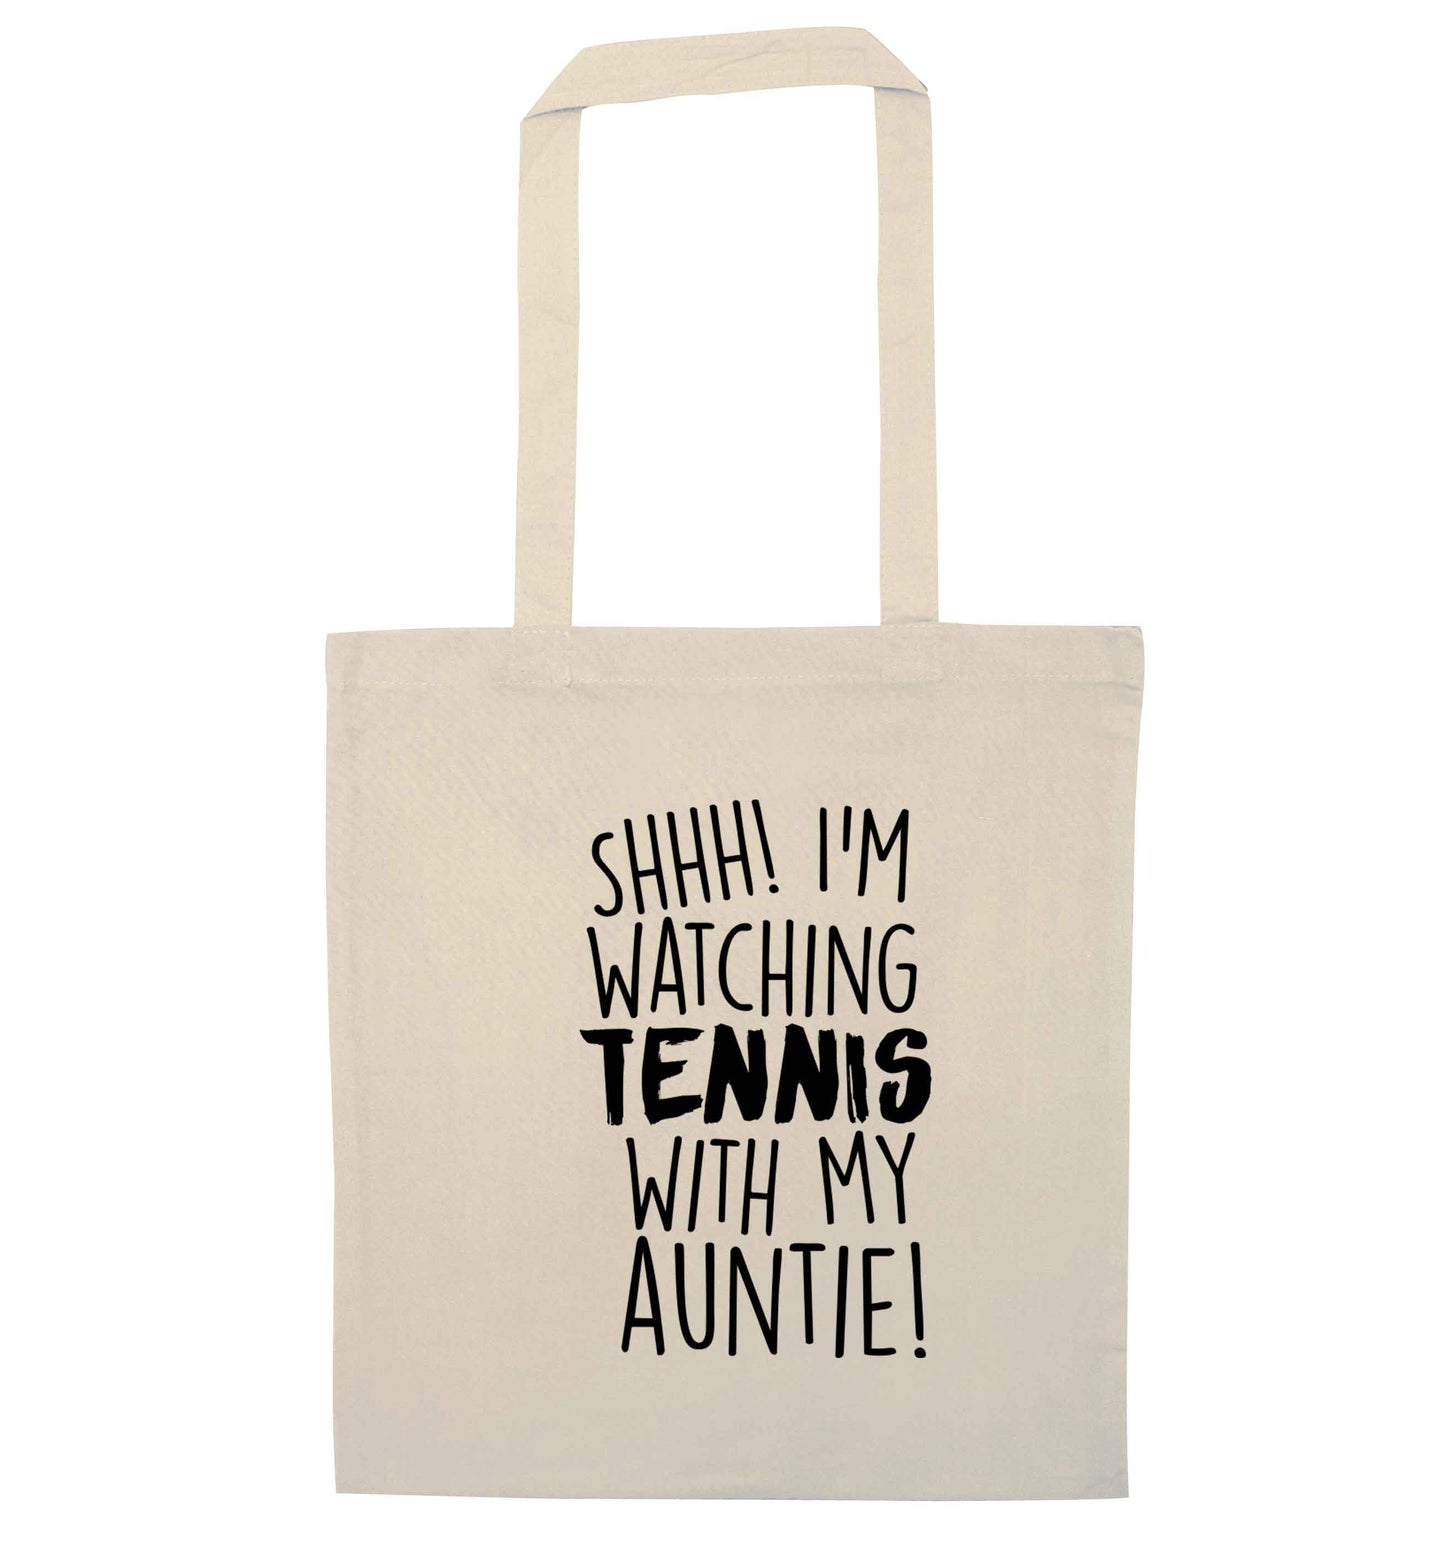 Shh! I'm watching tennis with my auntie! natural tote bag